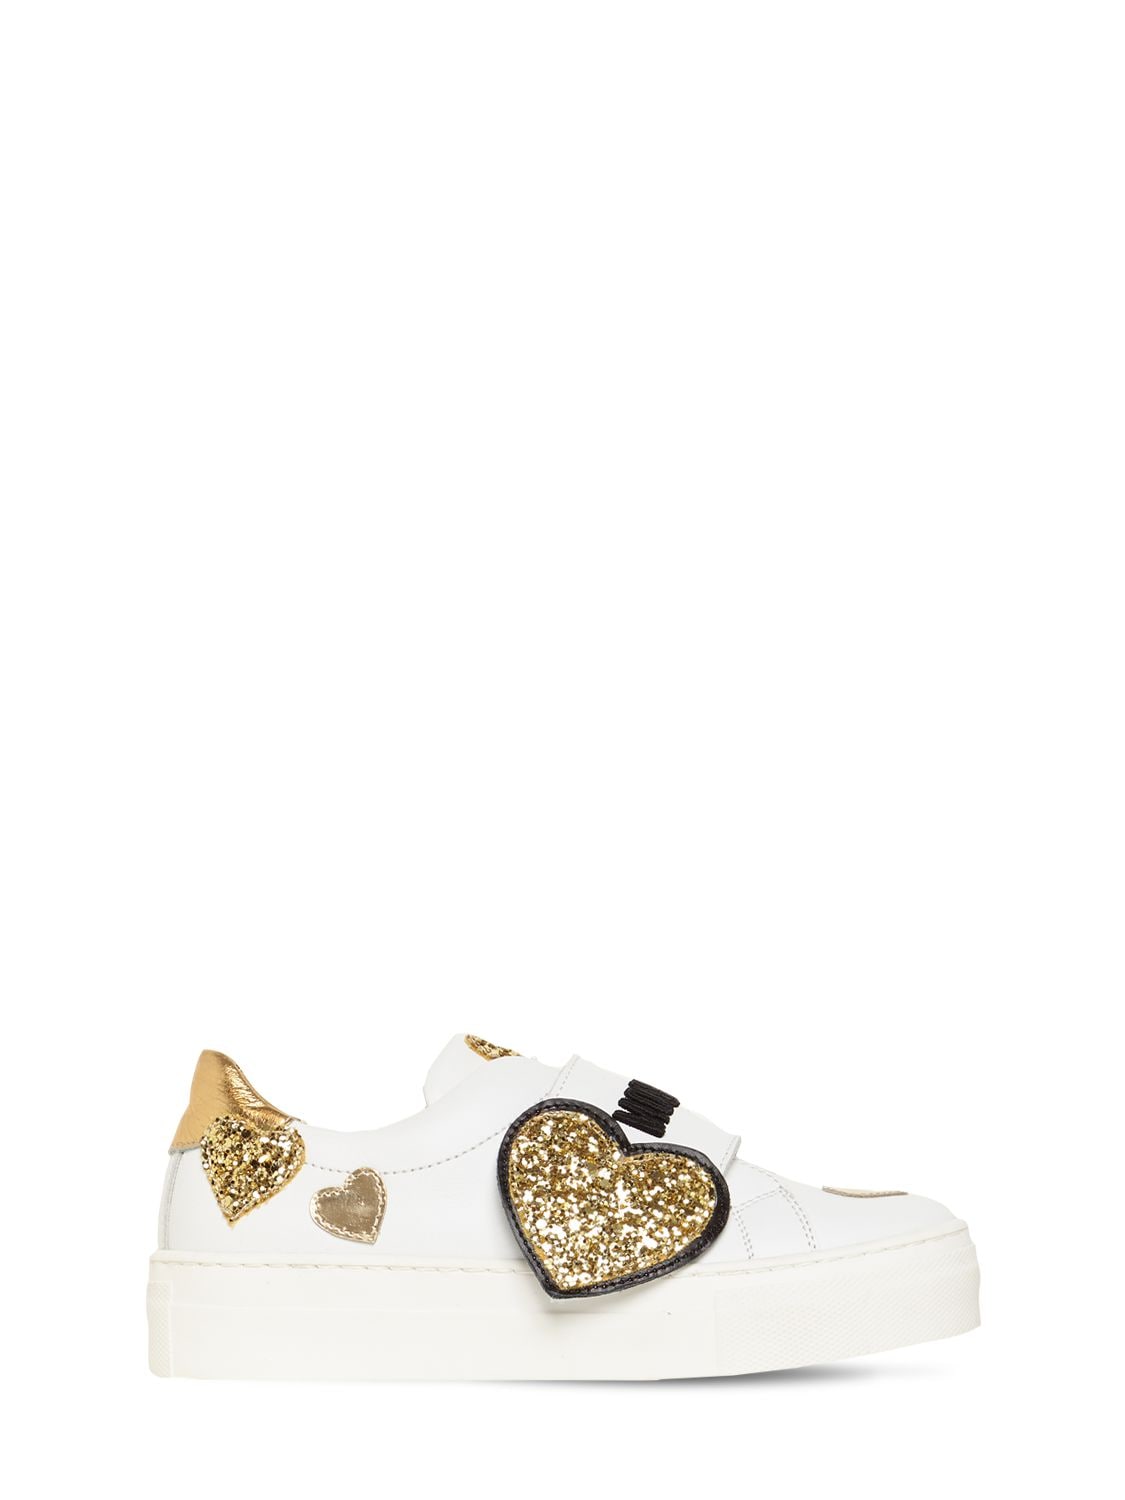 MOSCHINO GLITTERED HEARTS STRAP LEATHER SNEAKERS,74I1W4012-VKFSIDE1